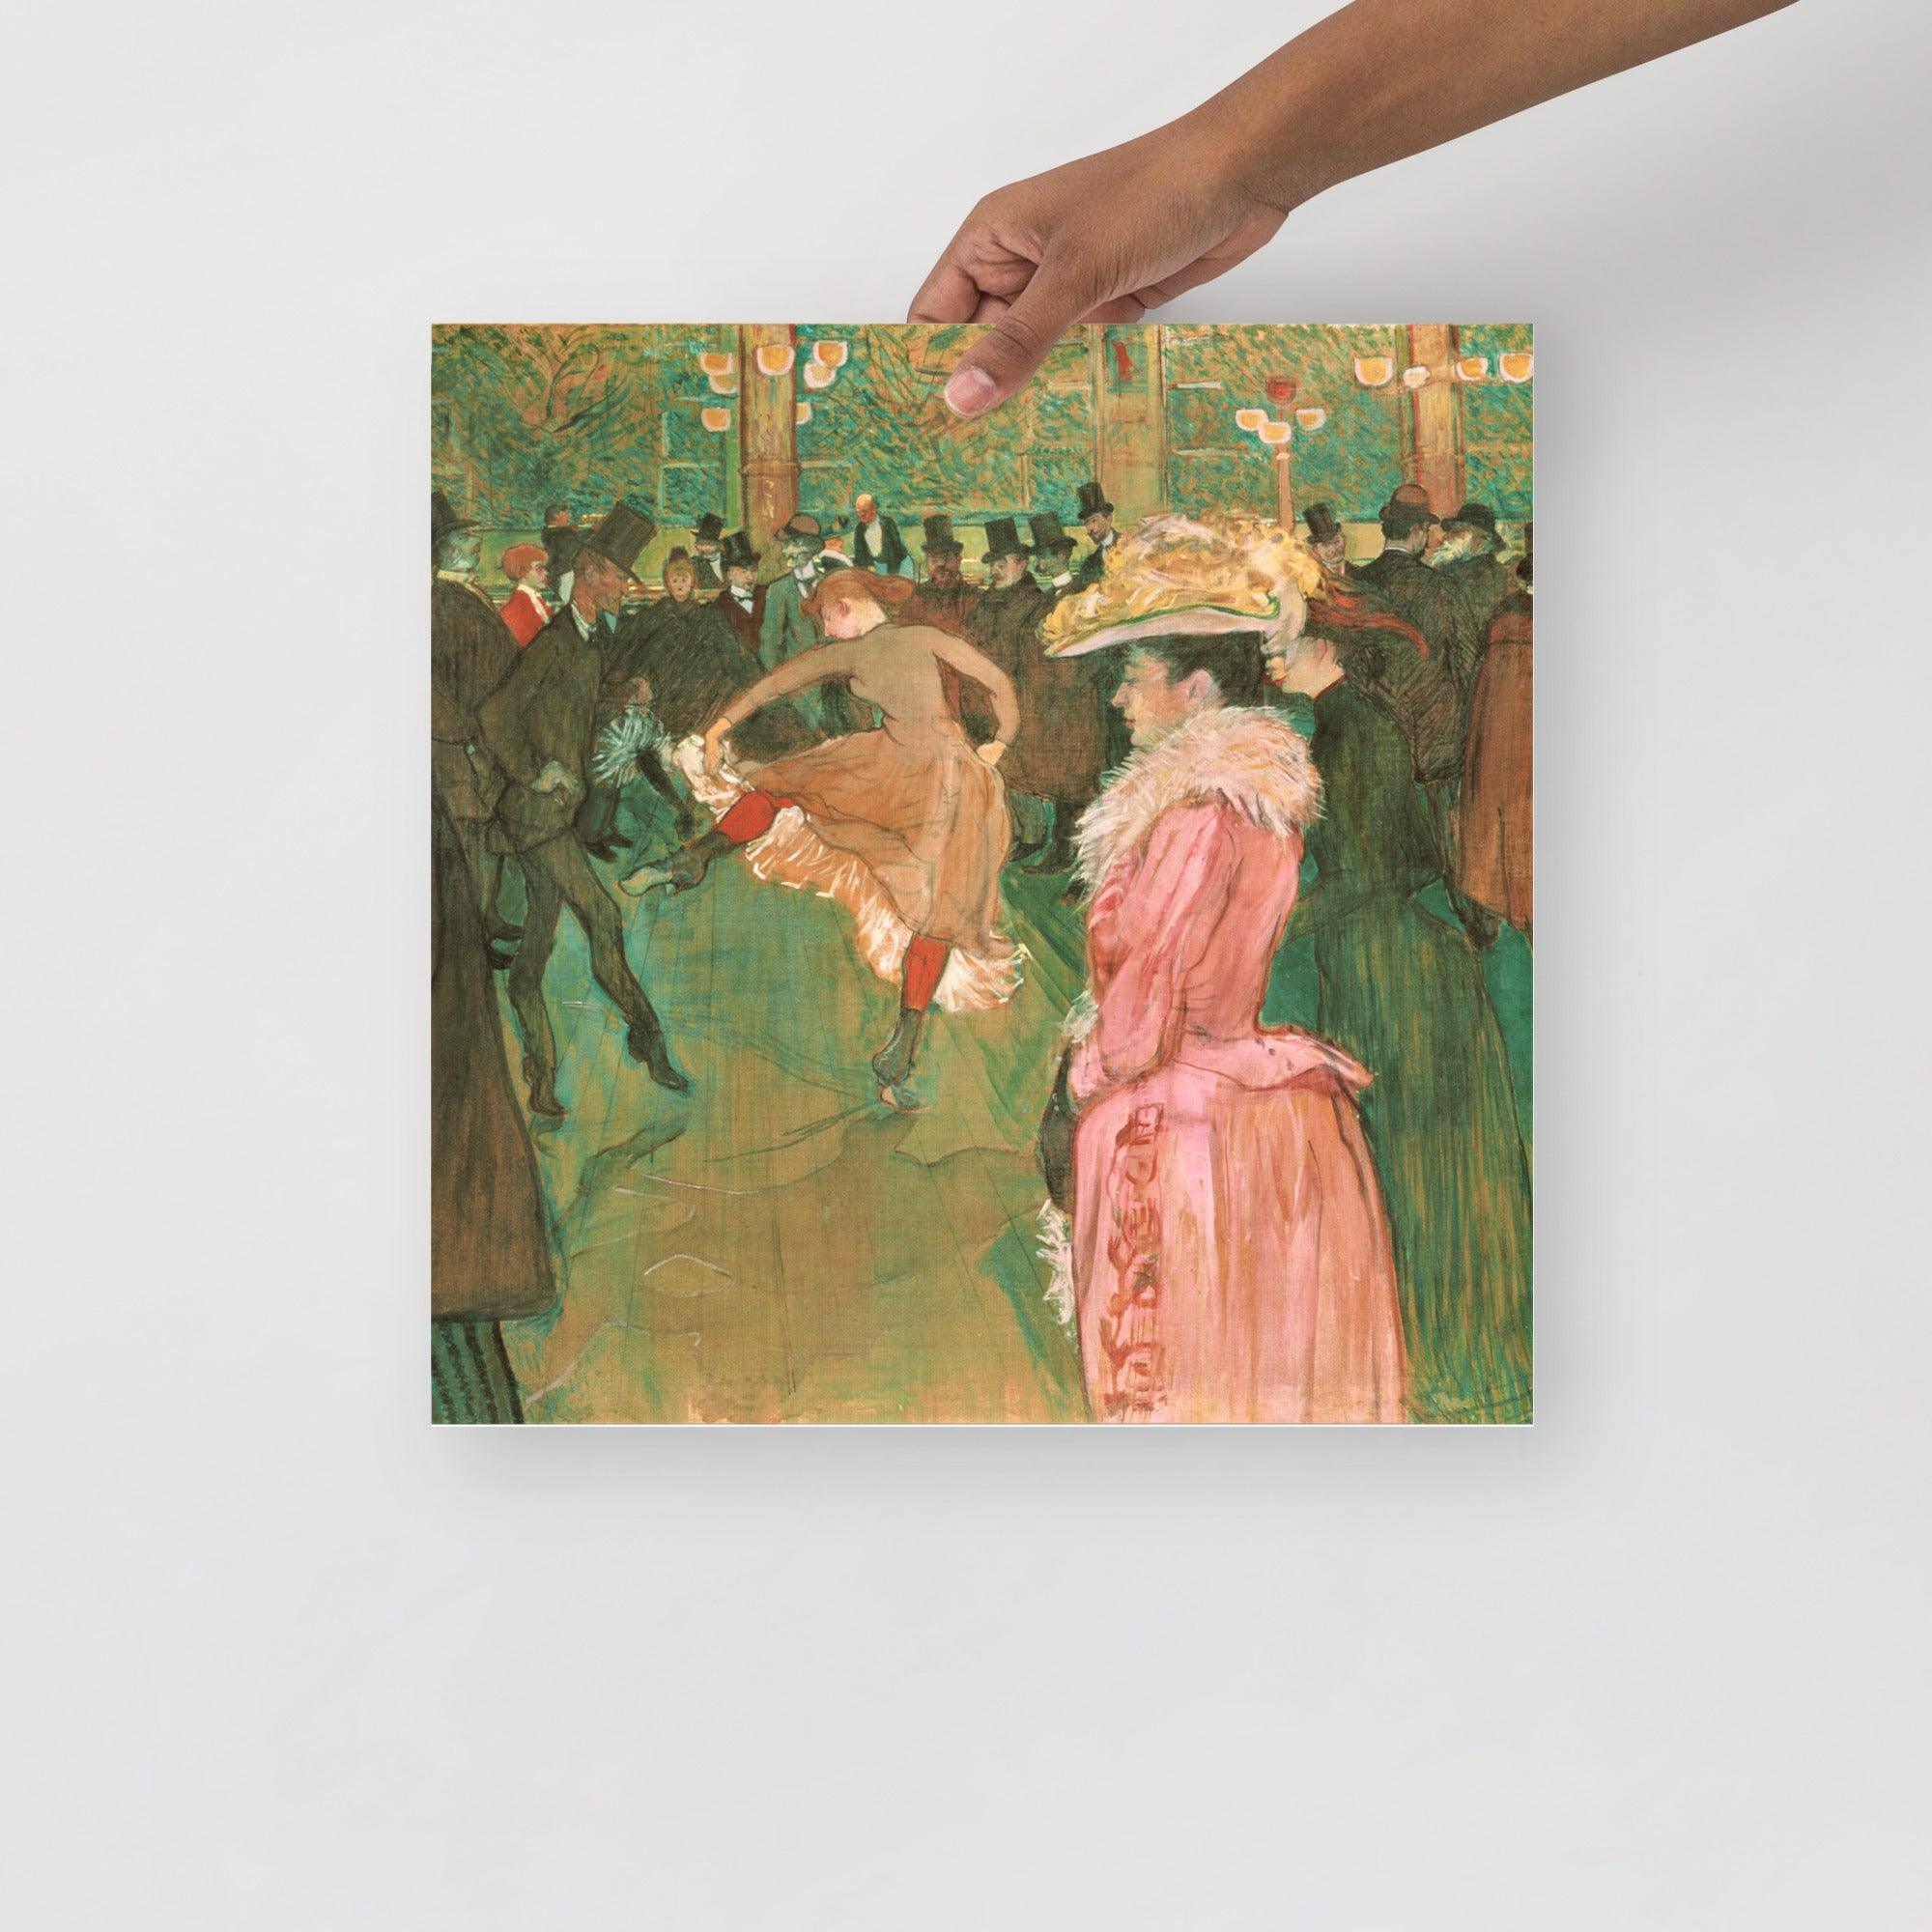 An At the Moulin Rouge: The Dance by Henri Toulouse-Lautrec poster on a plain backdrop in size 16x16”.